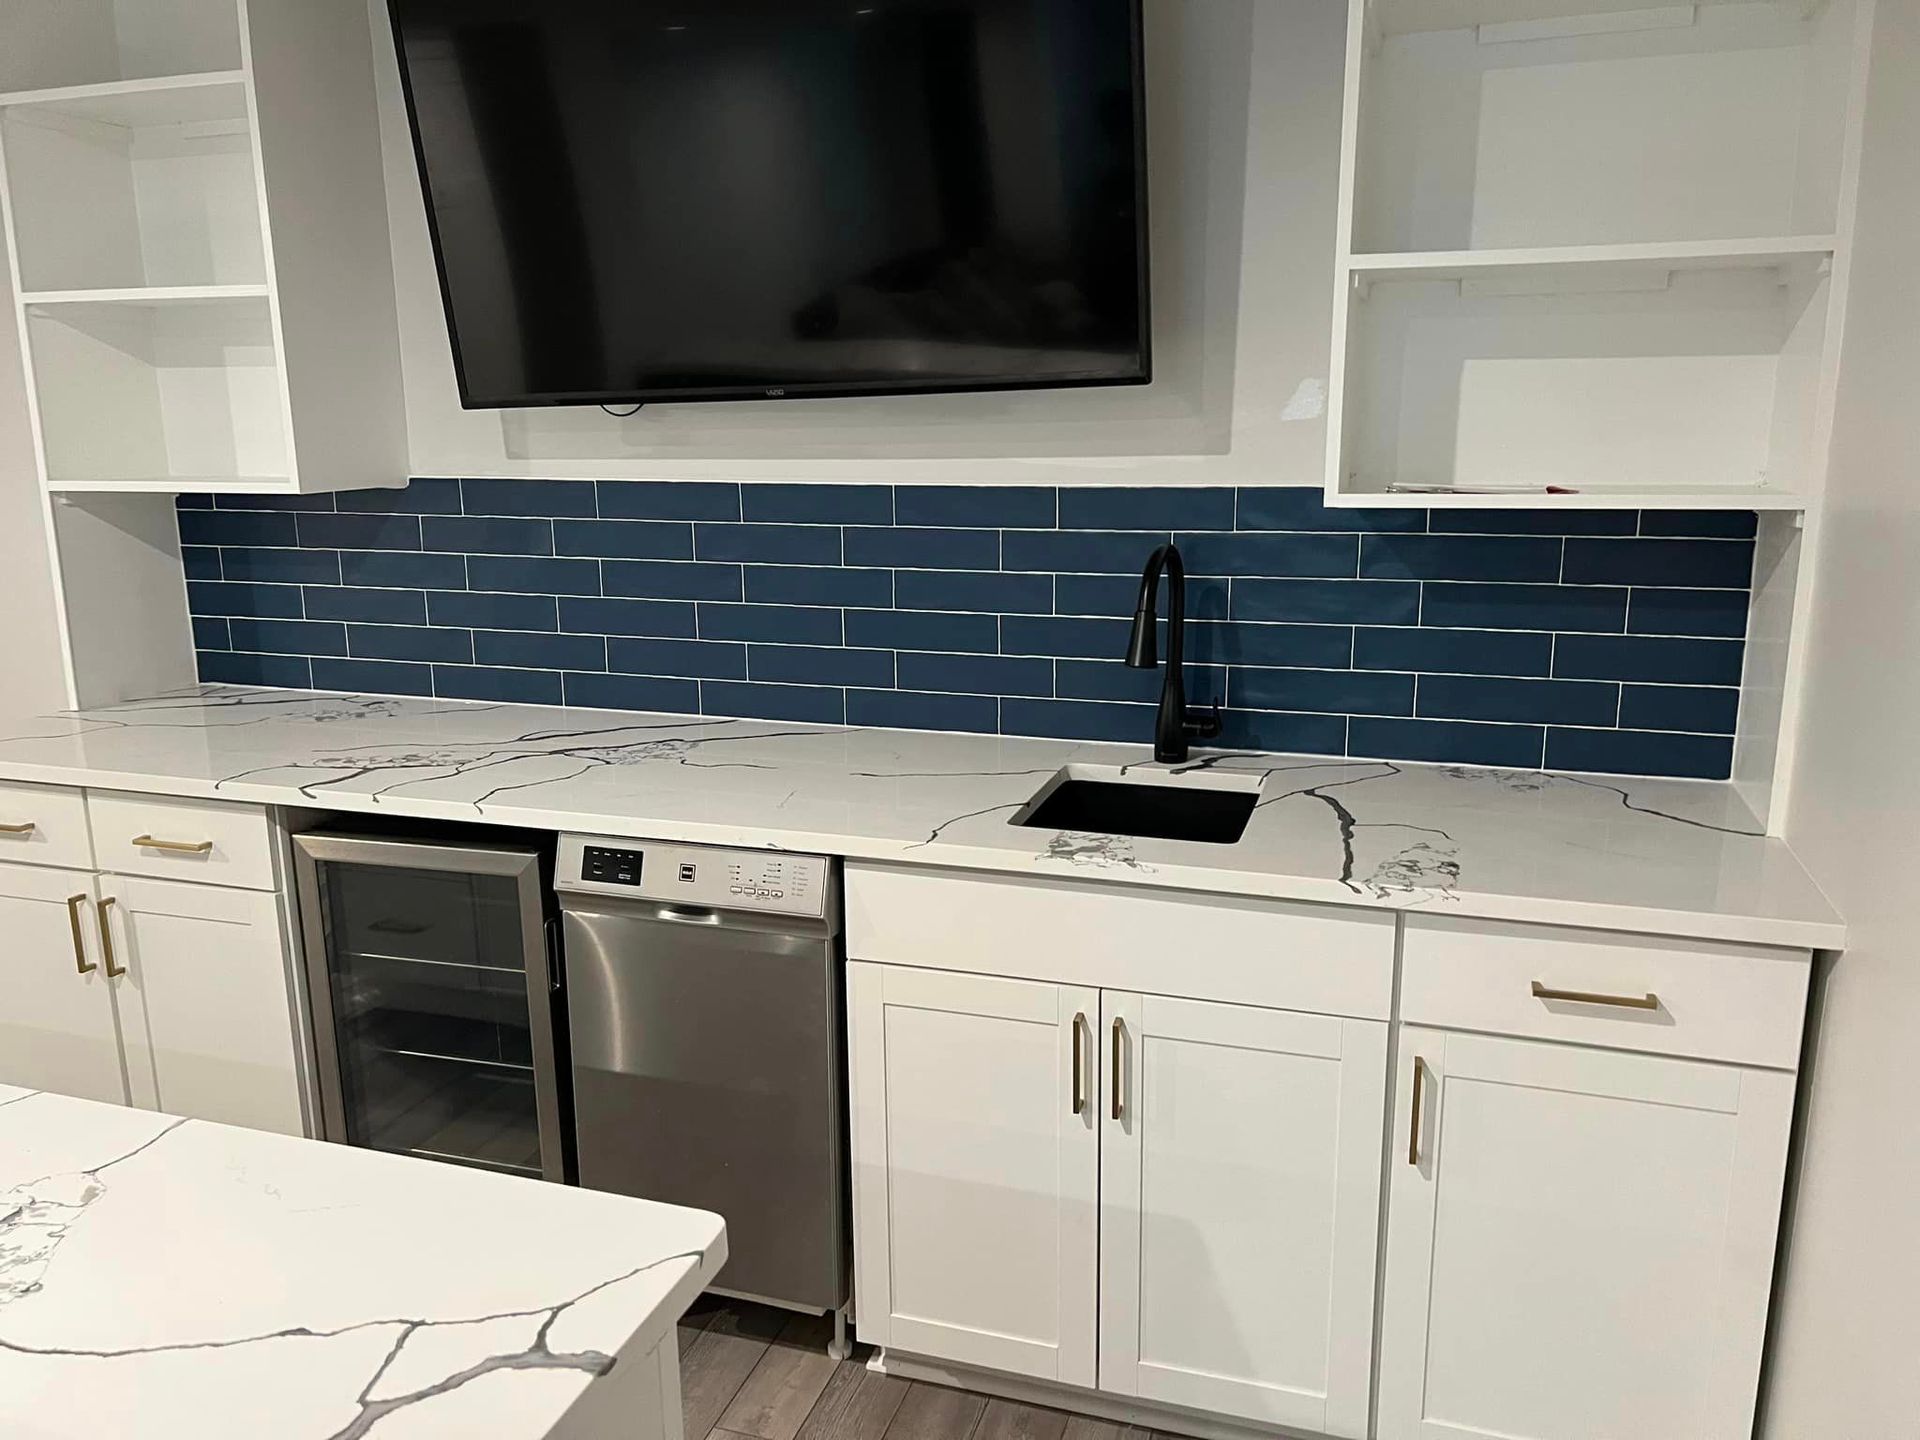 white granite kitchen counter with white shaker cabinets and a blue backsplash for a ktichen remodel in pittsburgh